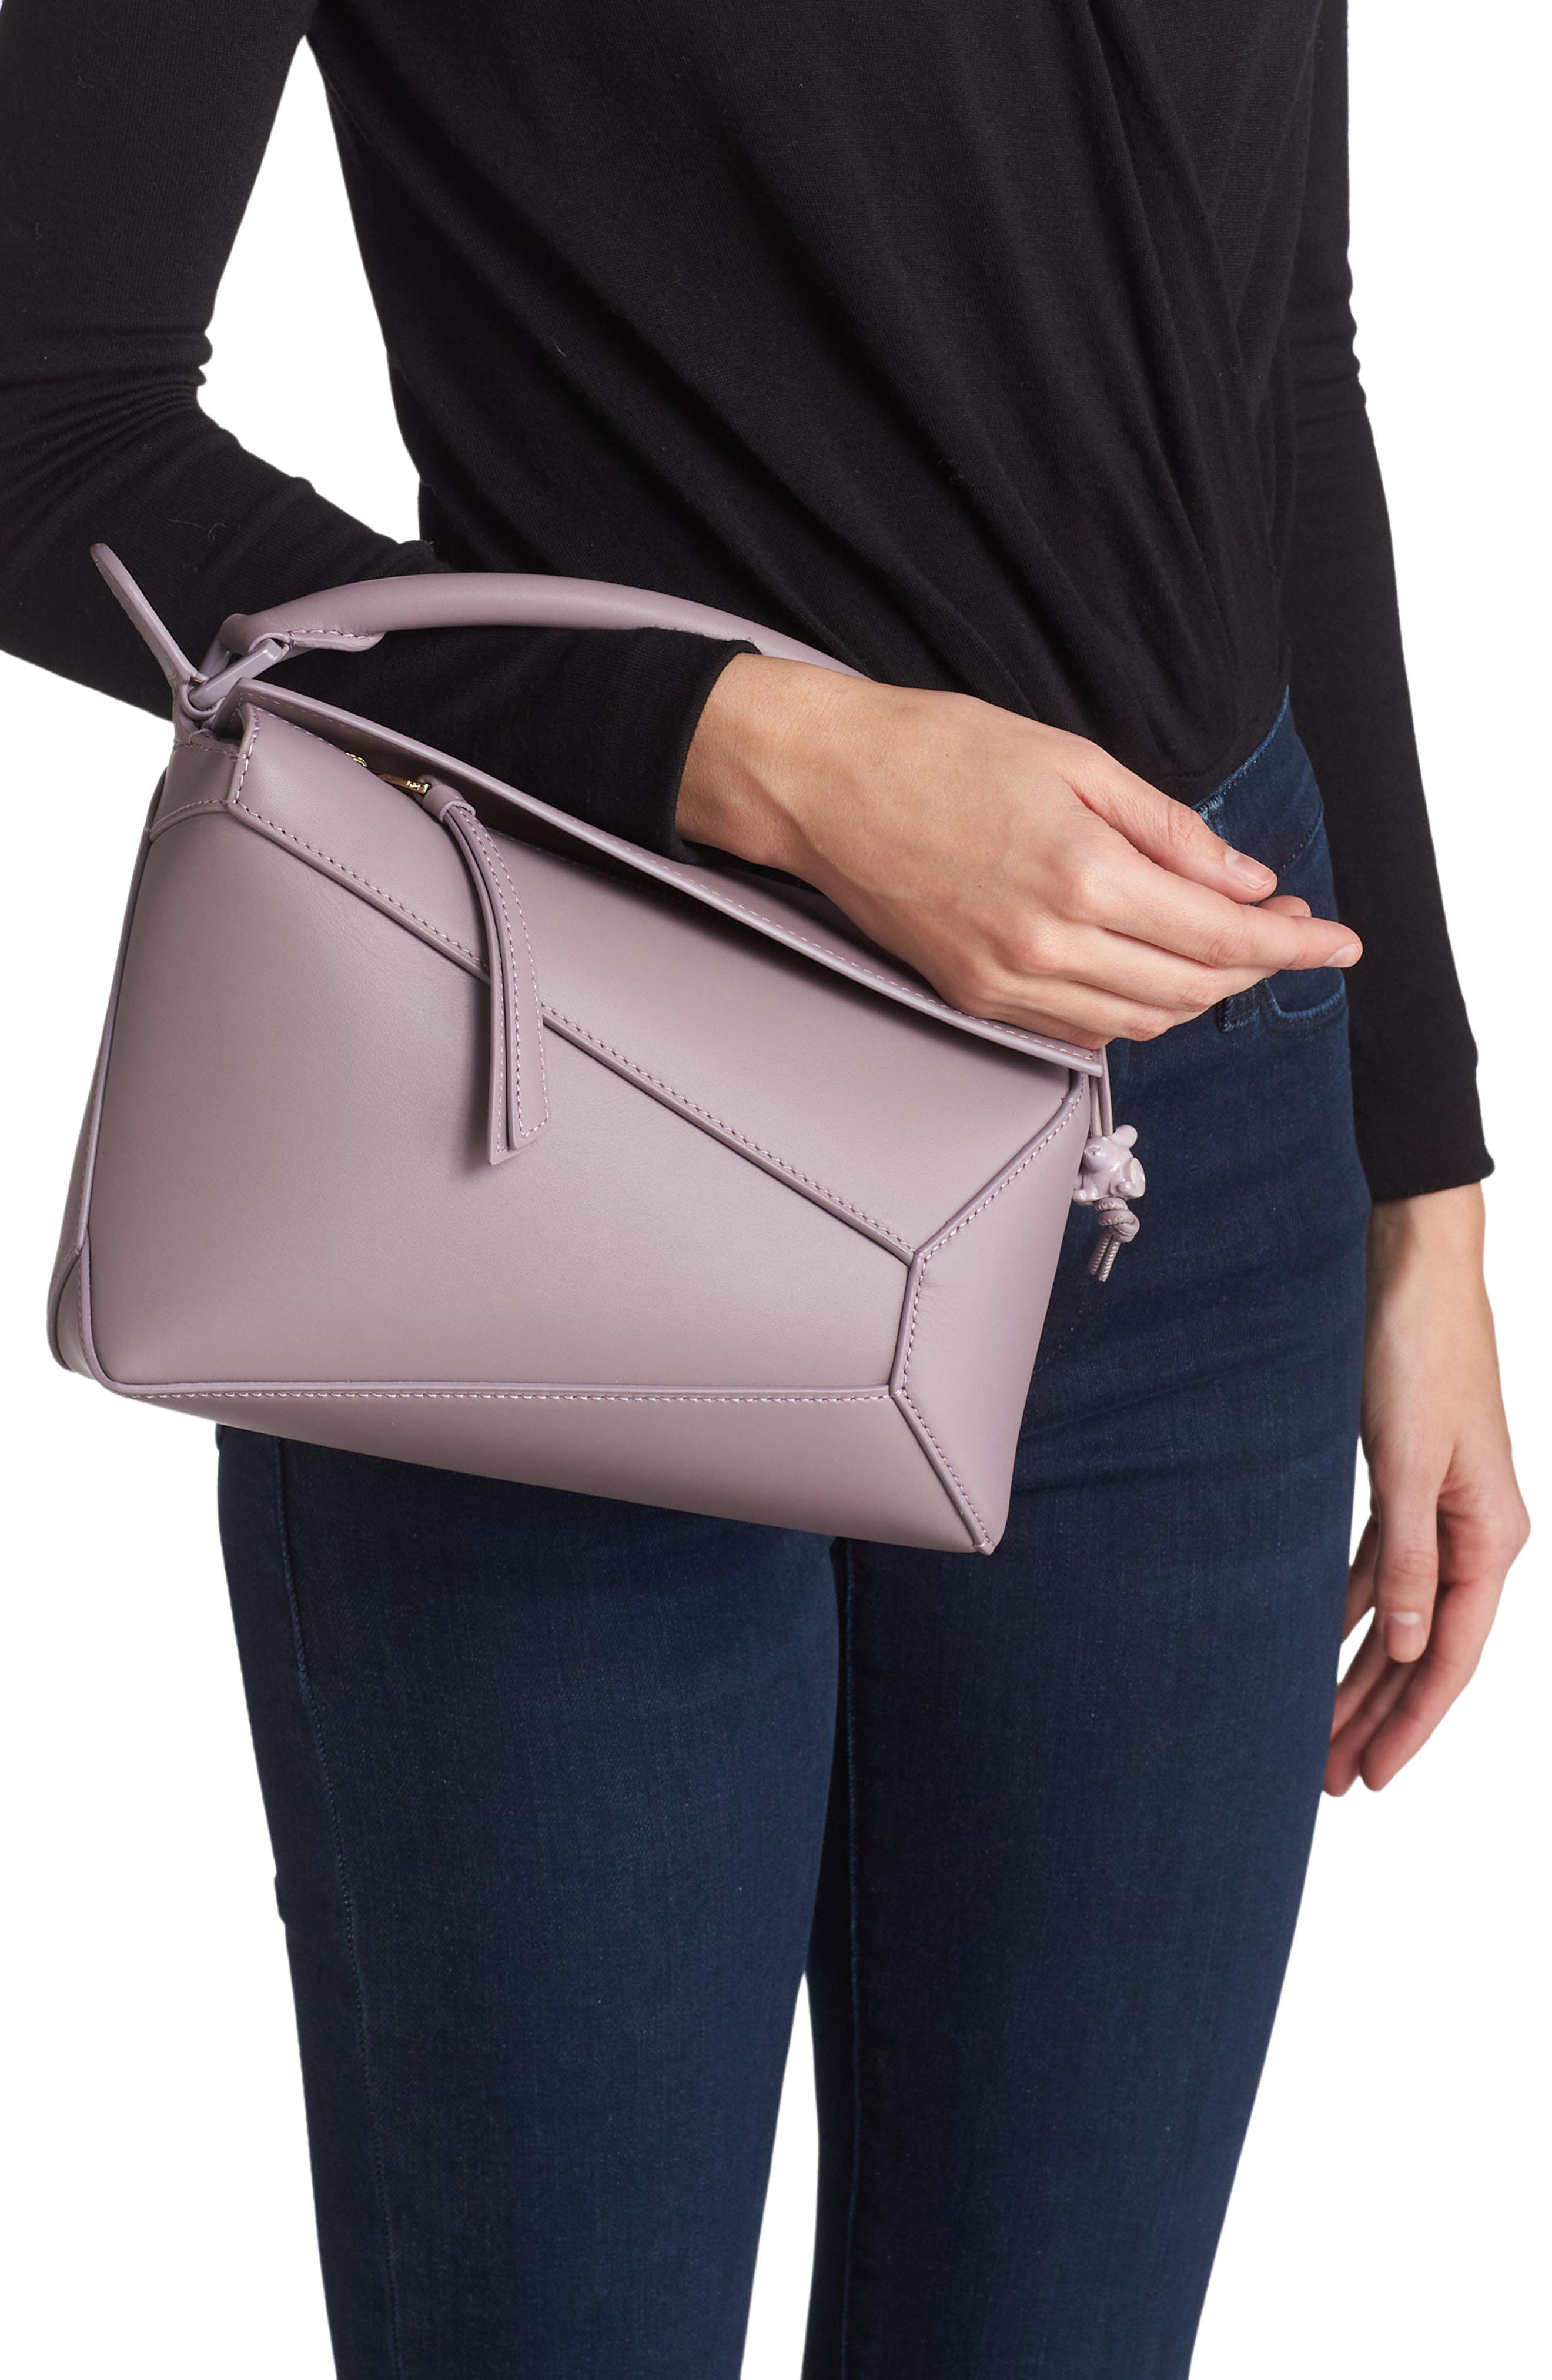 Loewe Puzzle Small Bag in Soft Pink